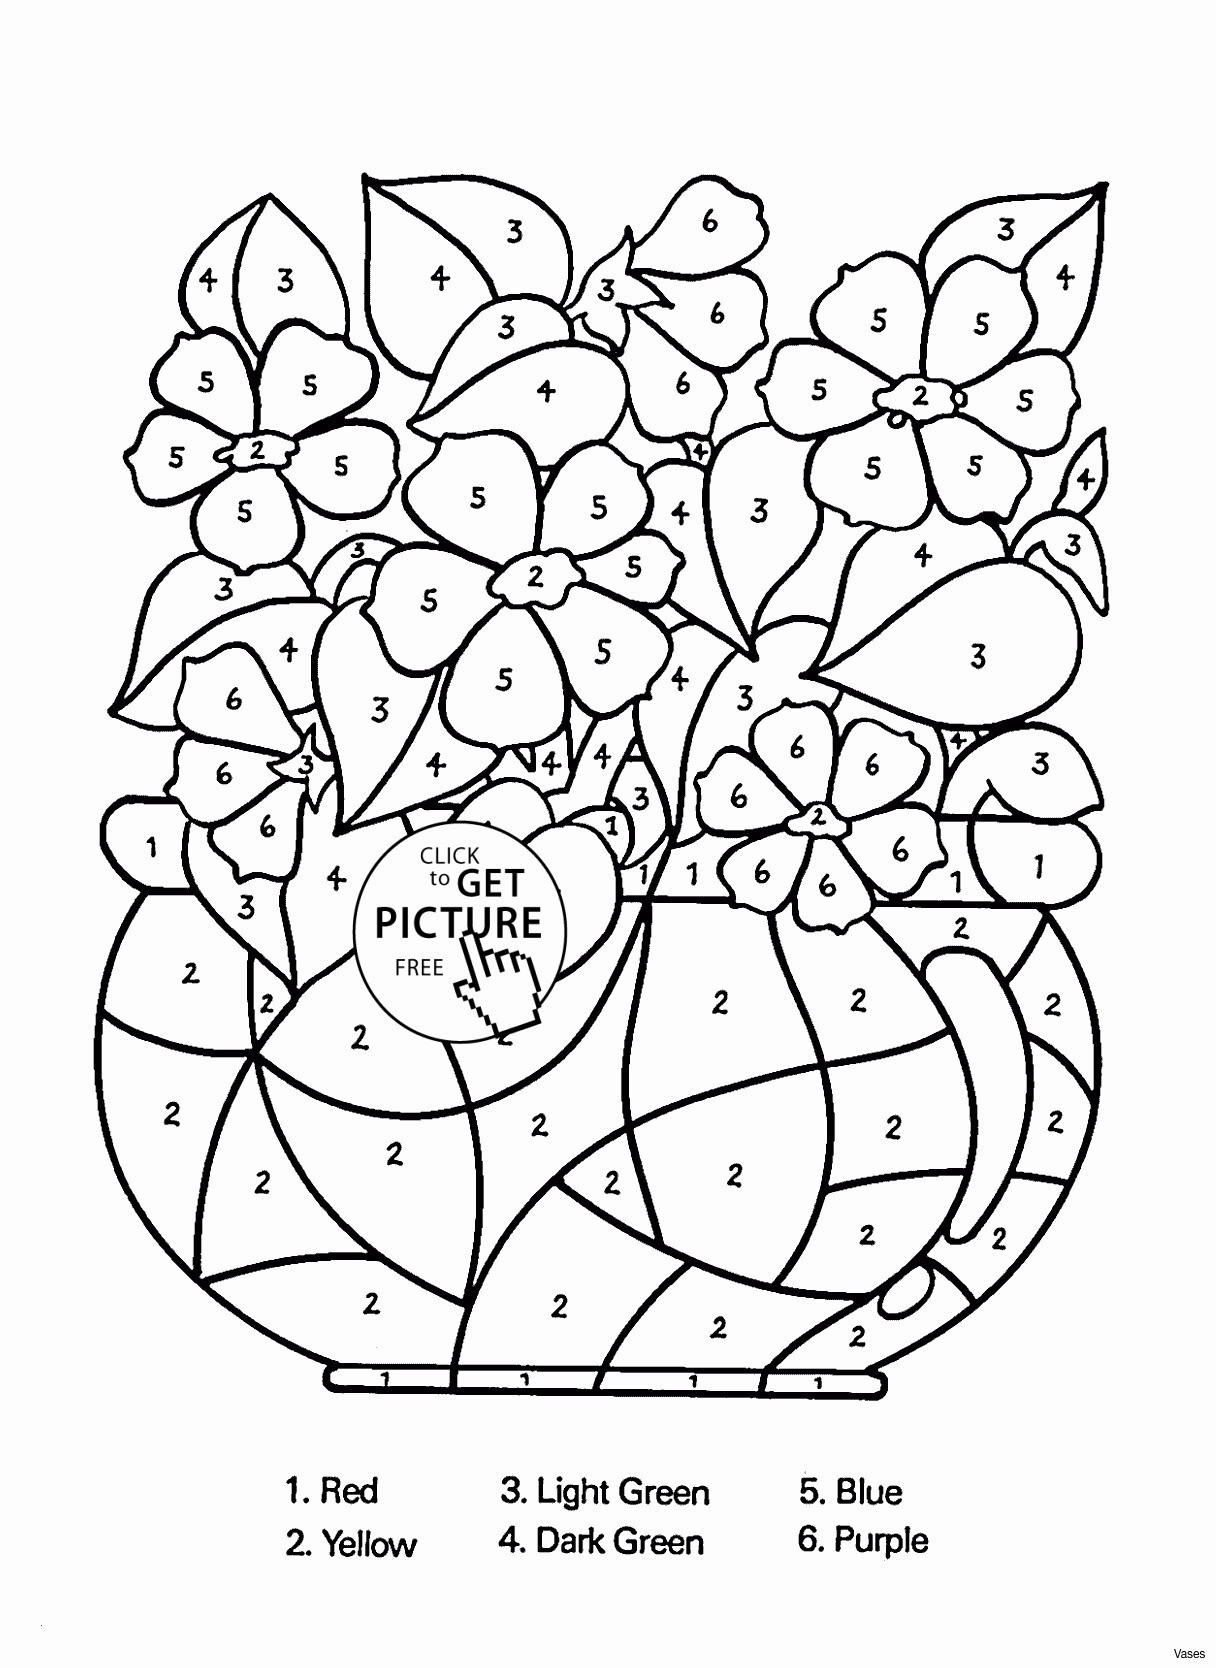 black and white decorative vases of blue and green vase gallery blue and green bedroom unique decorative pertaining to blue and green vase gallery free flower coloring pages awesome vases flower vase coloring page of